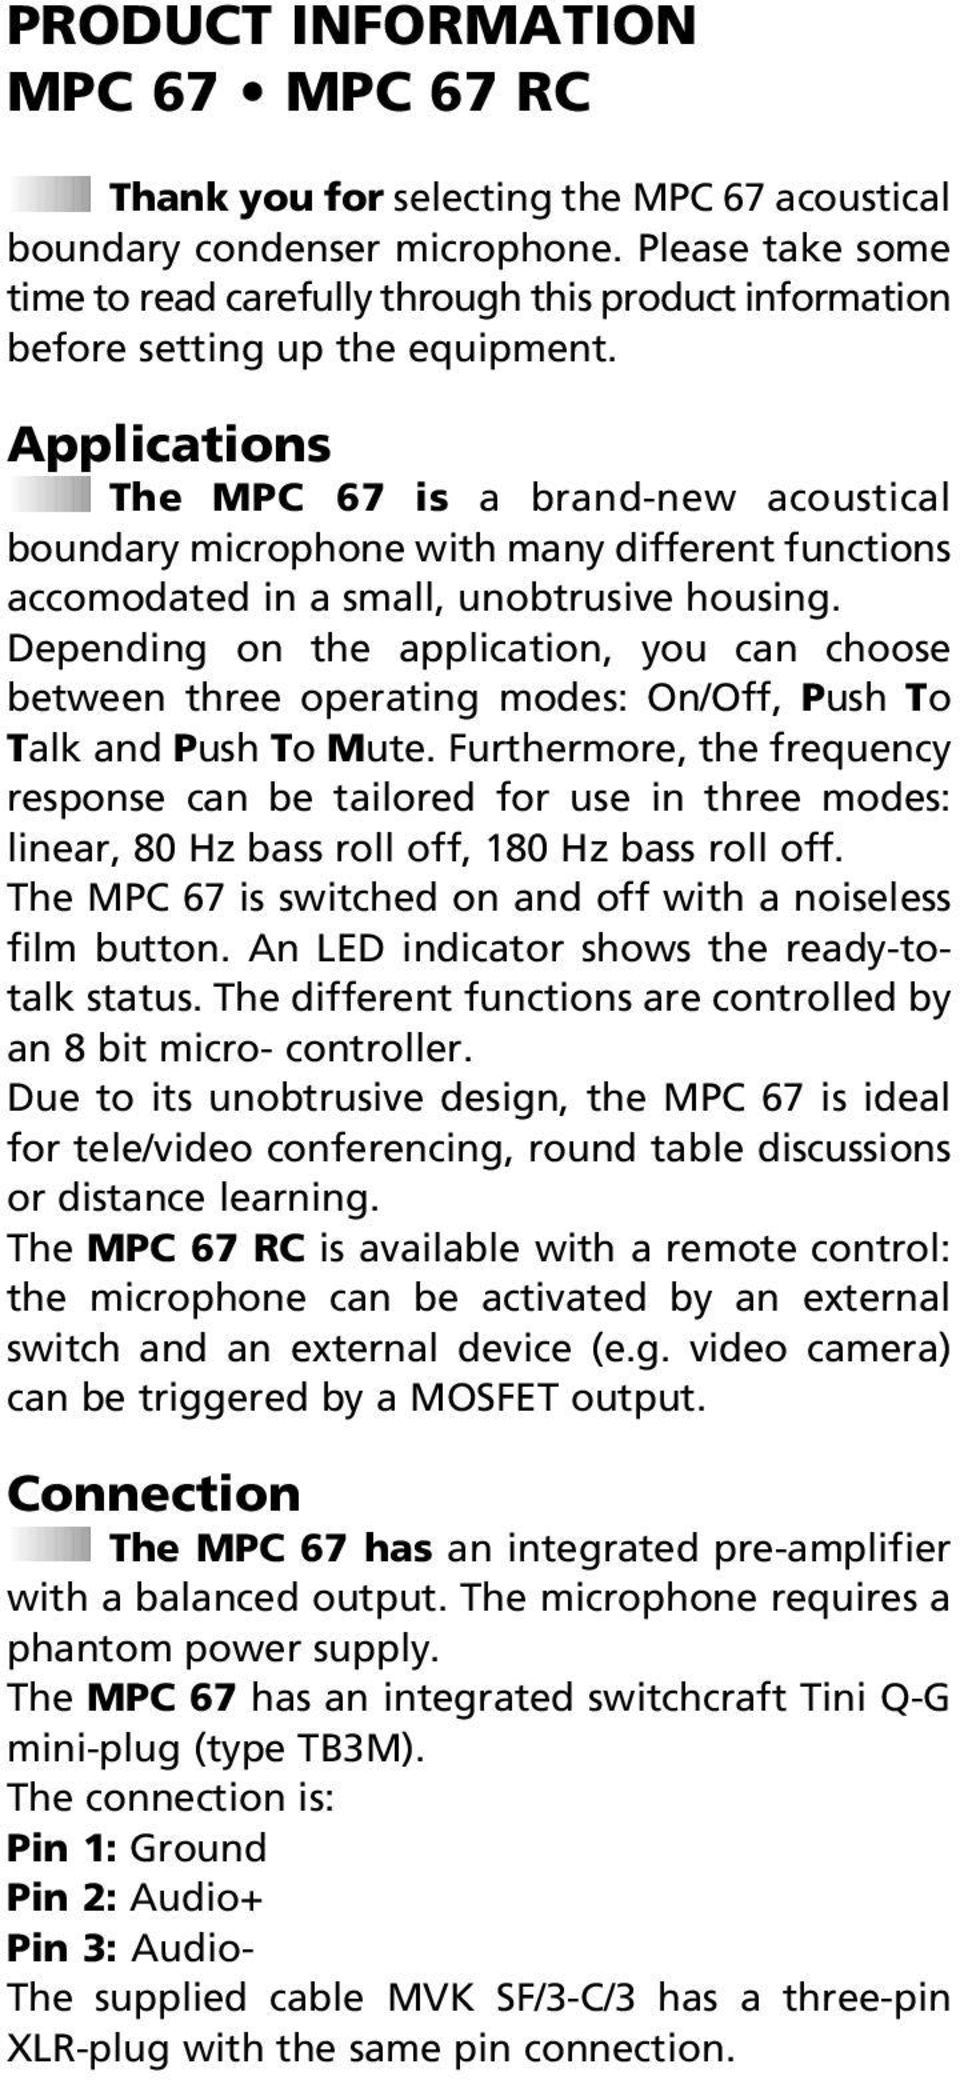 Applications The MPC 67 is a brand-new acoustical boundary microphone with many different functions accomodated in a small, unobtrusive housing.